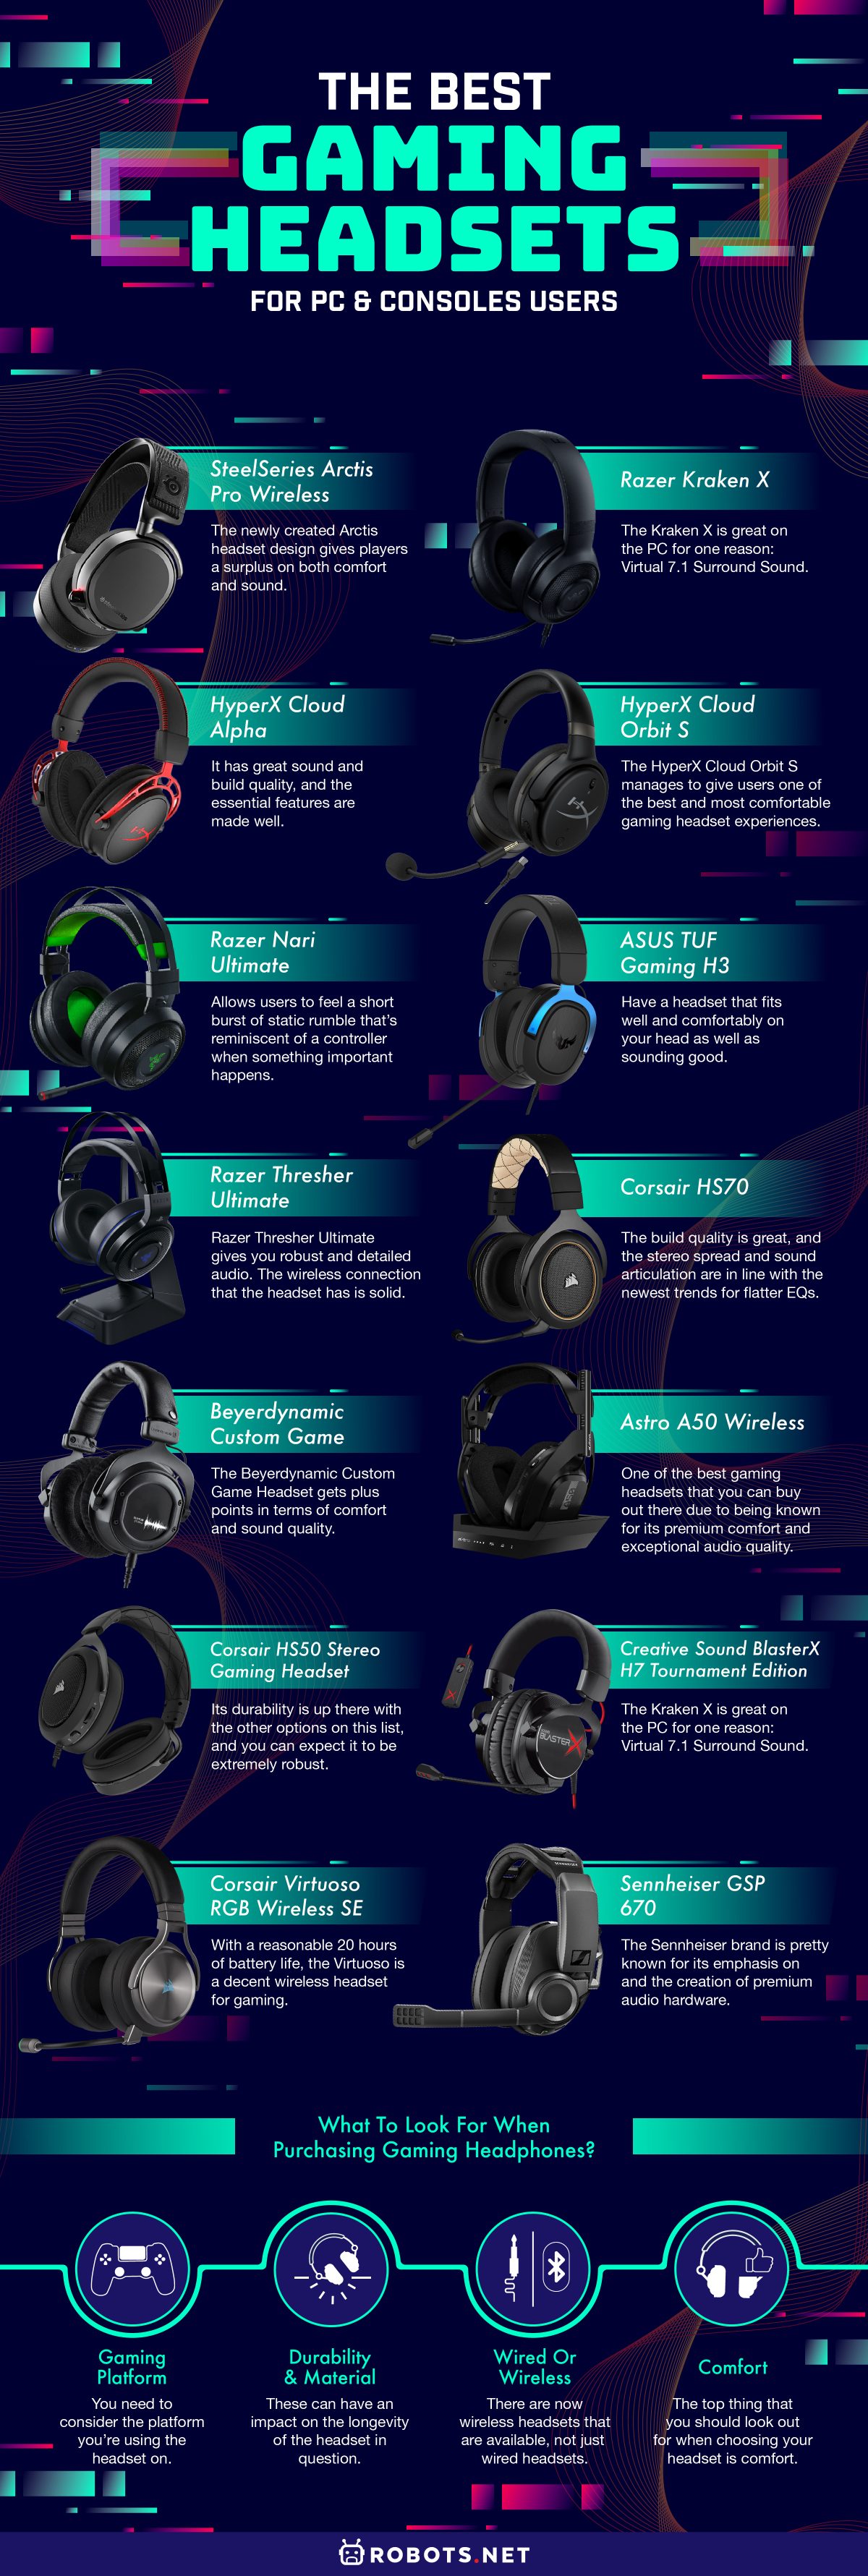 The Best Gaming Headsets for PC & Consoles Users